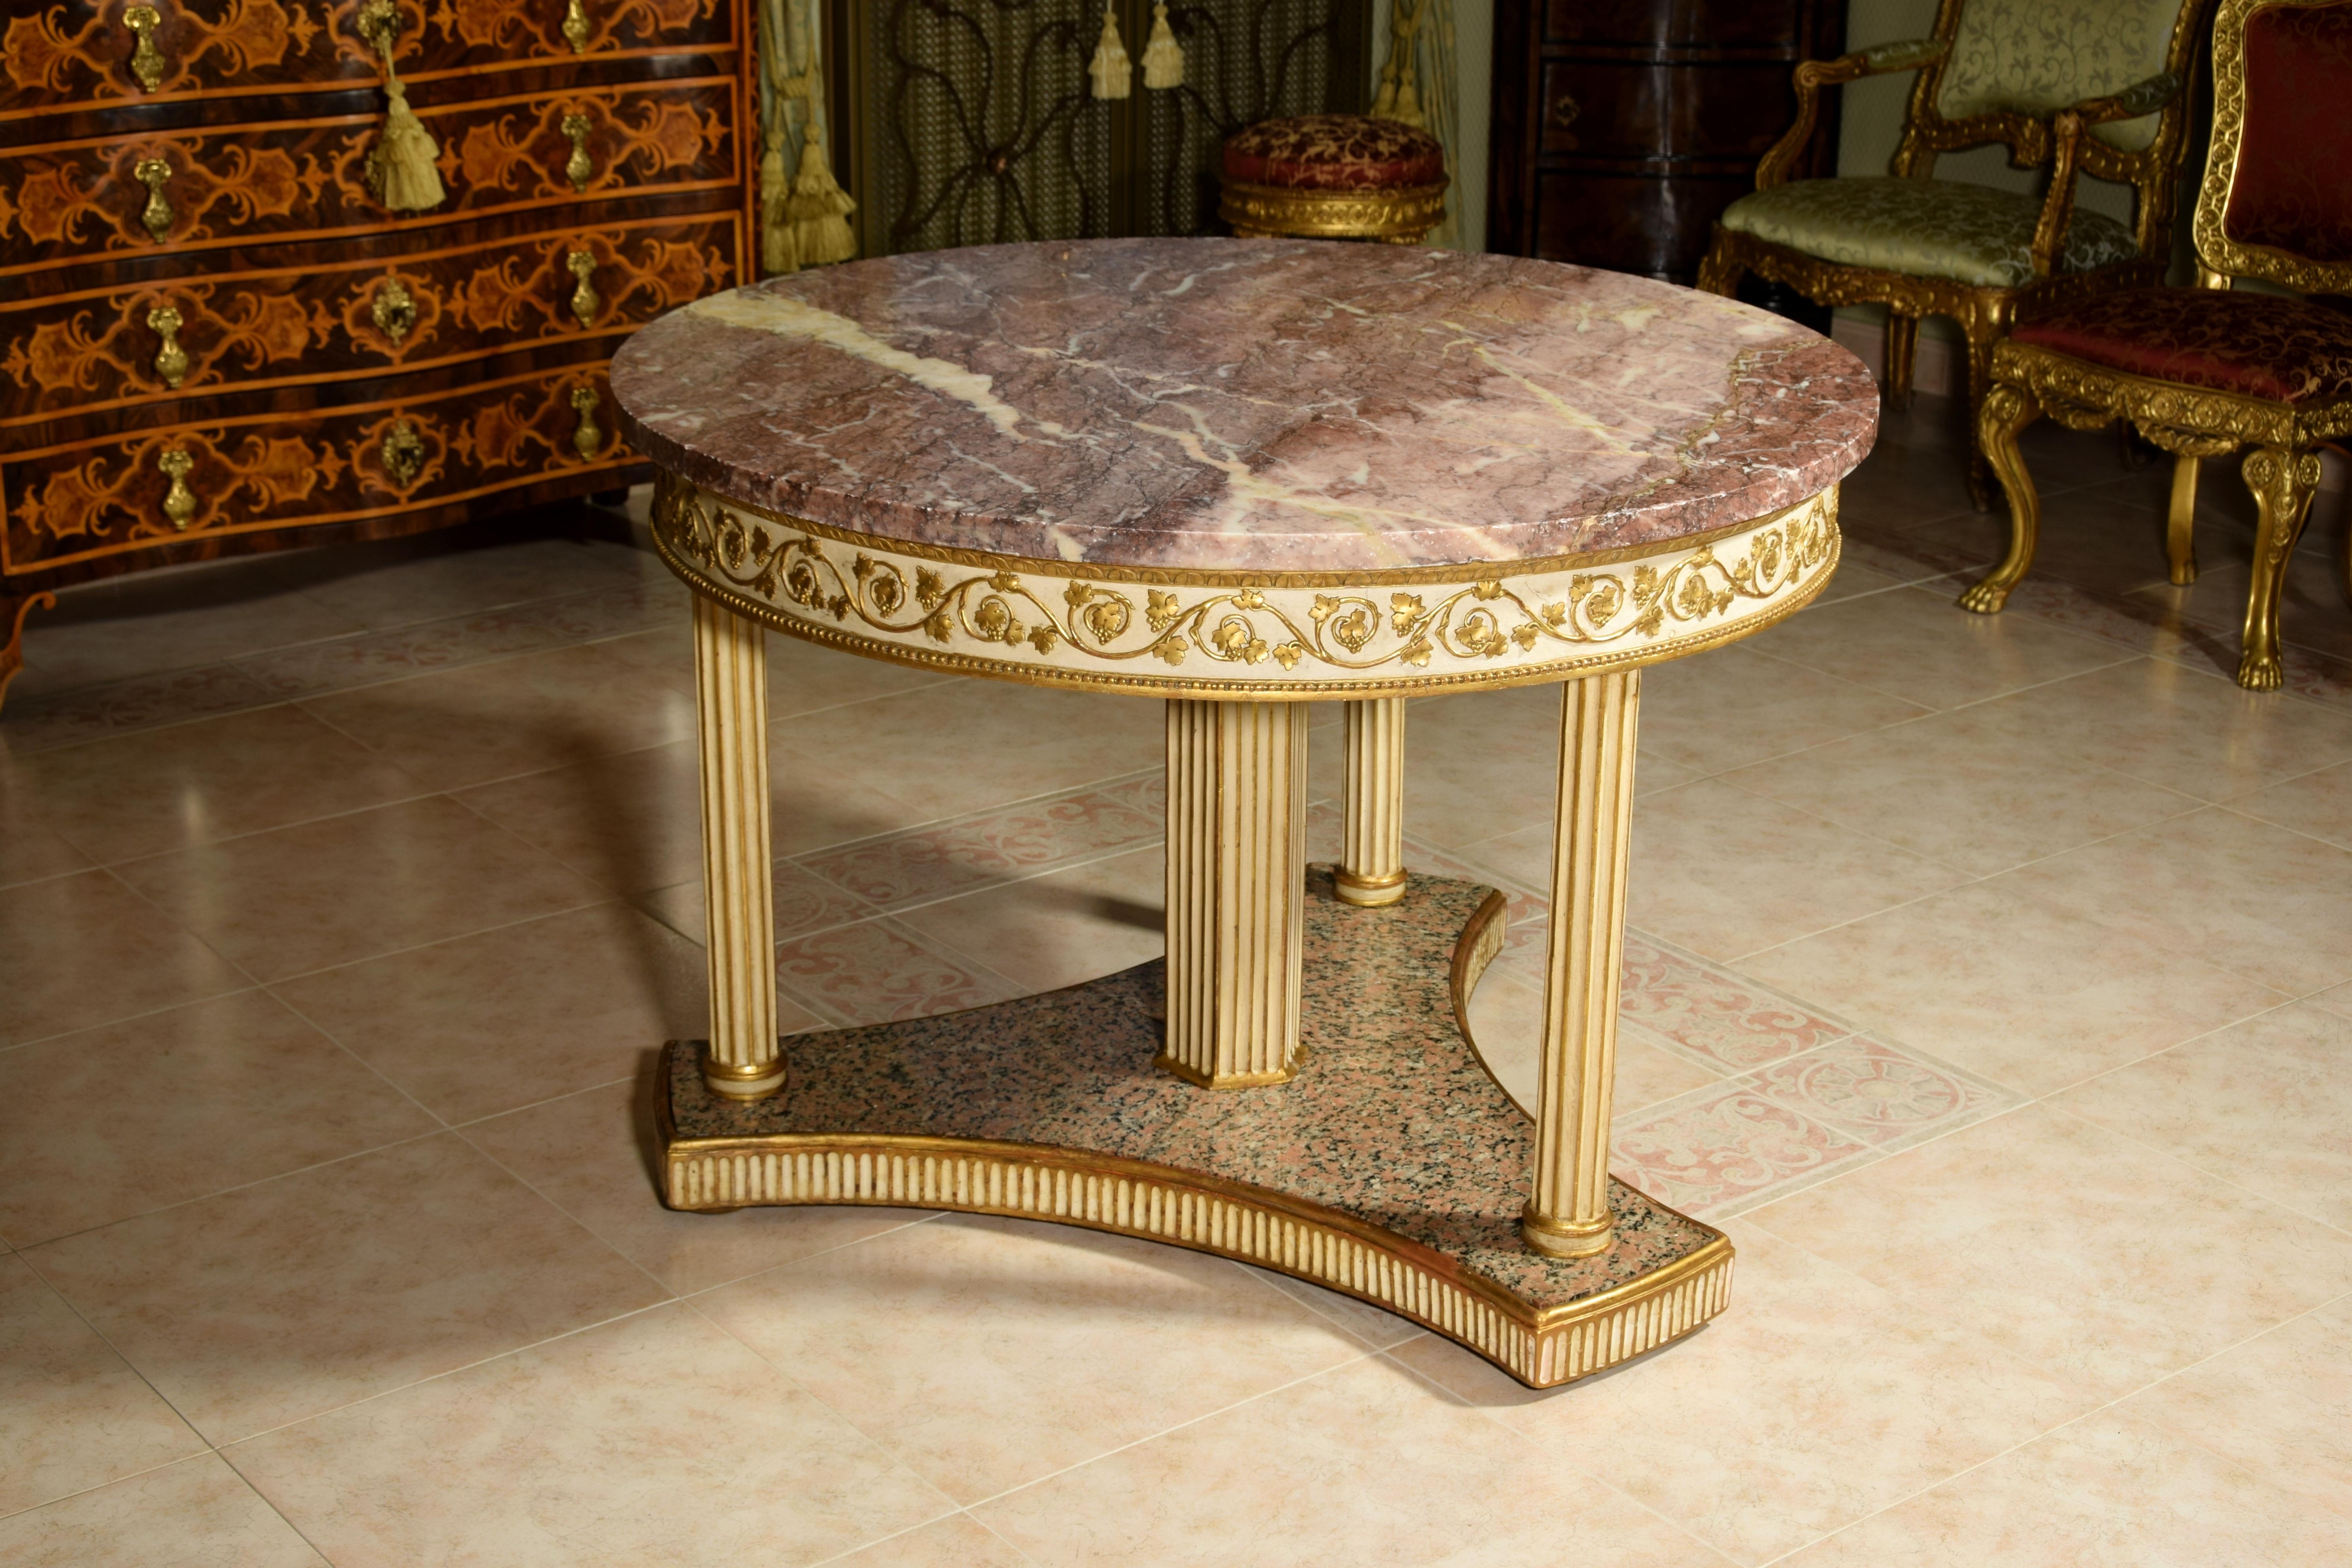 18th century, Italian neoclassical round lacquered wood center table with marble top

This elegant neoclassical table was made towards the end of the 18th century in central Italy.
It consists of a valuable marble top (